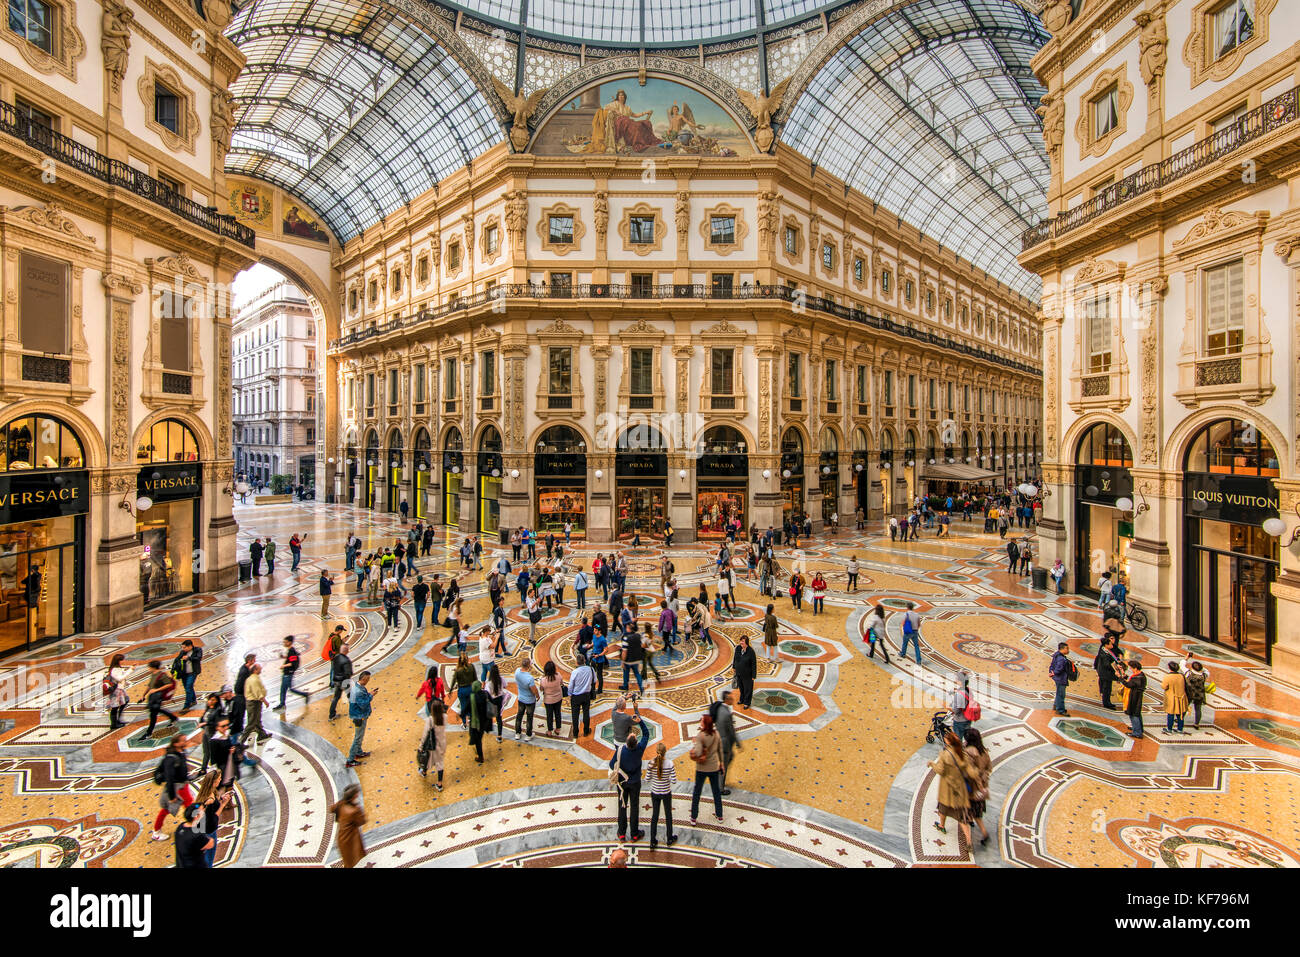 Galleria Vittorio Emanuele II shopping mall, Milan, Lombardie, Italie Banque D'Images